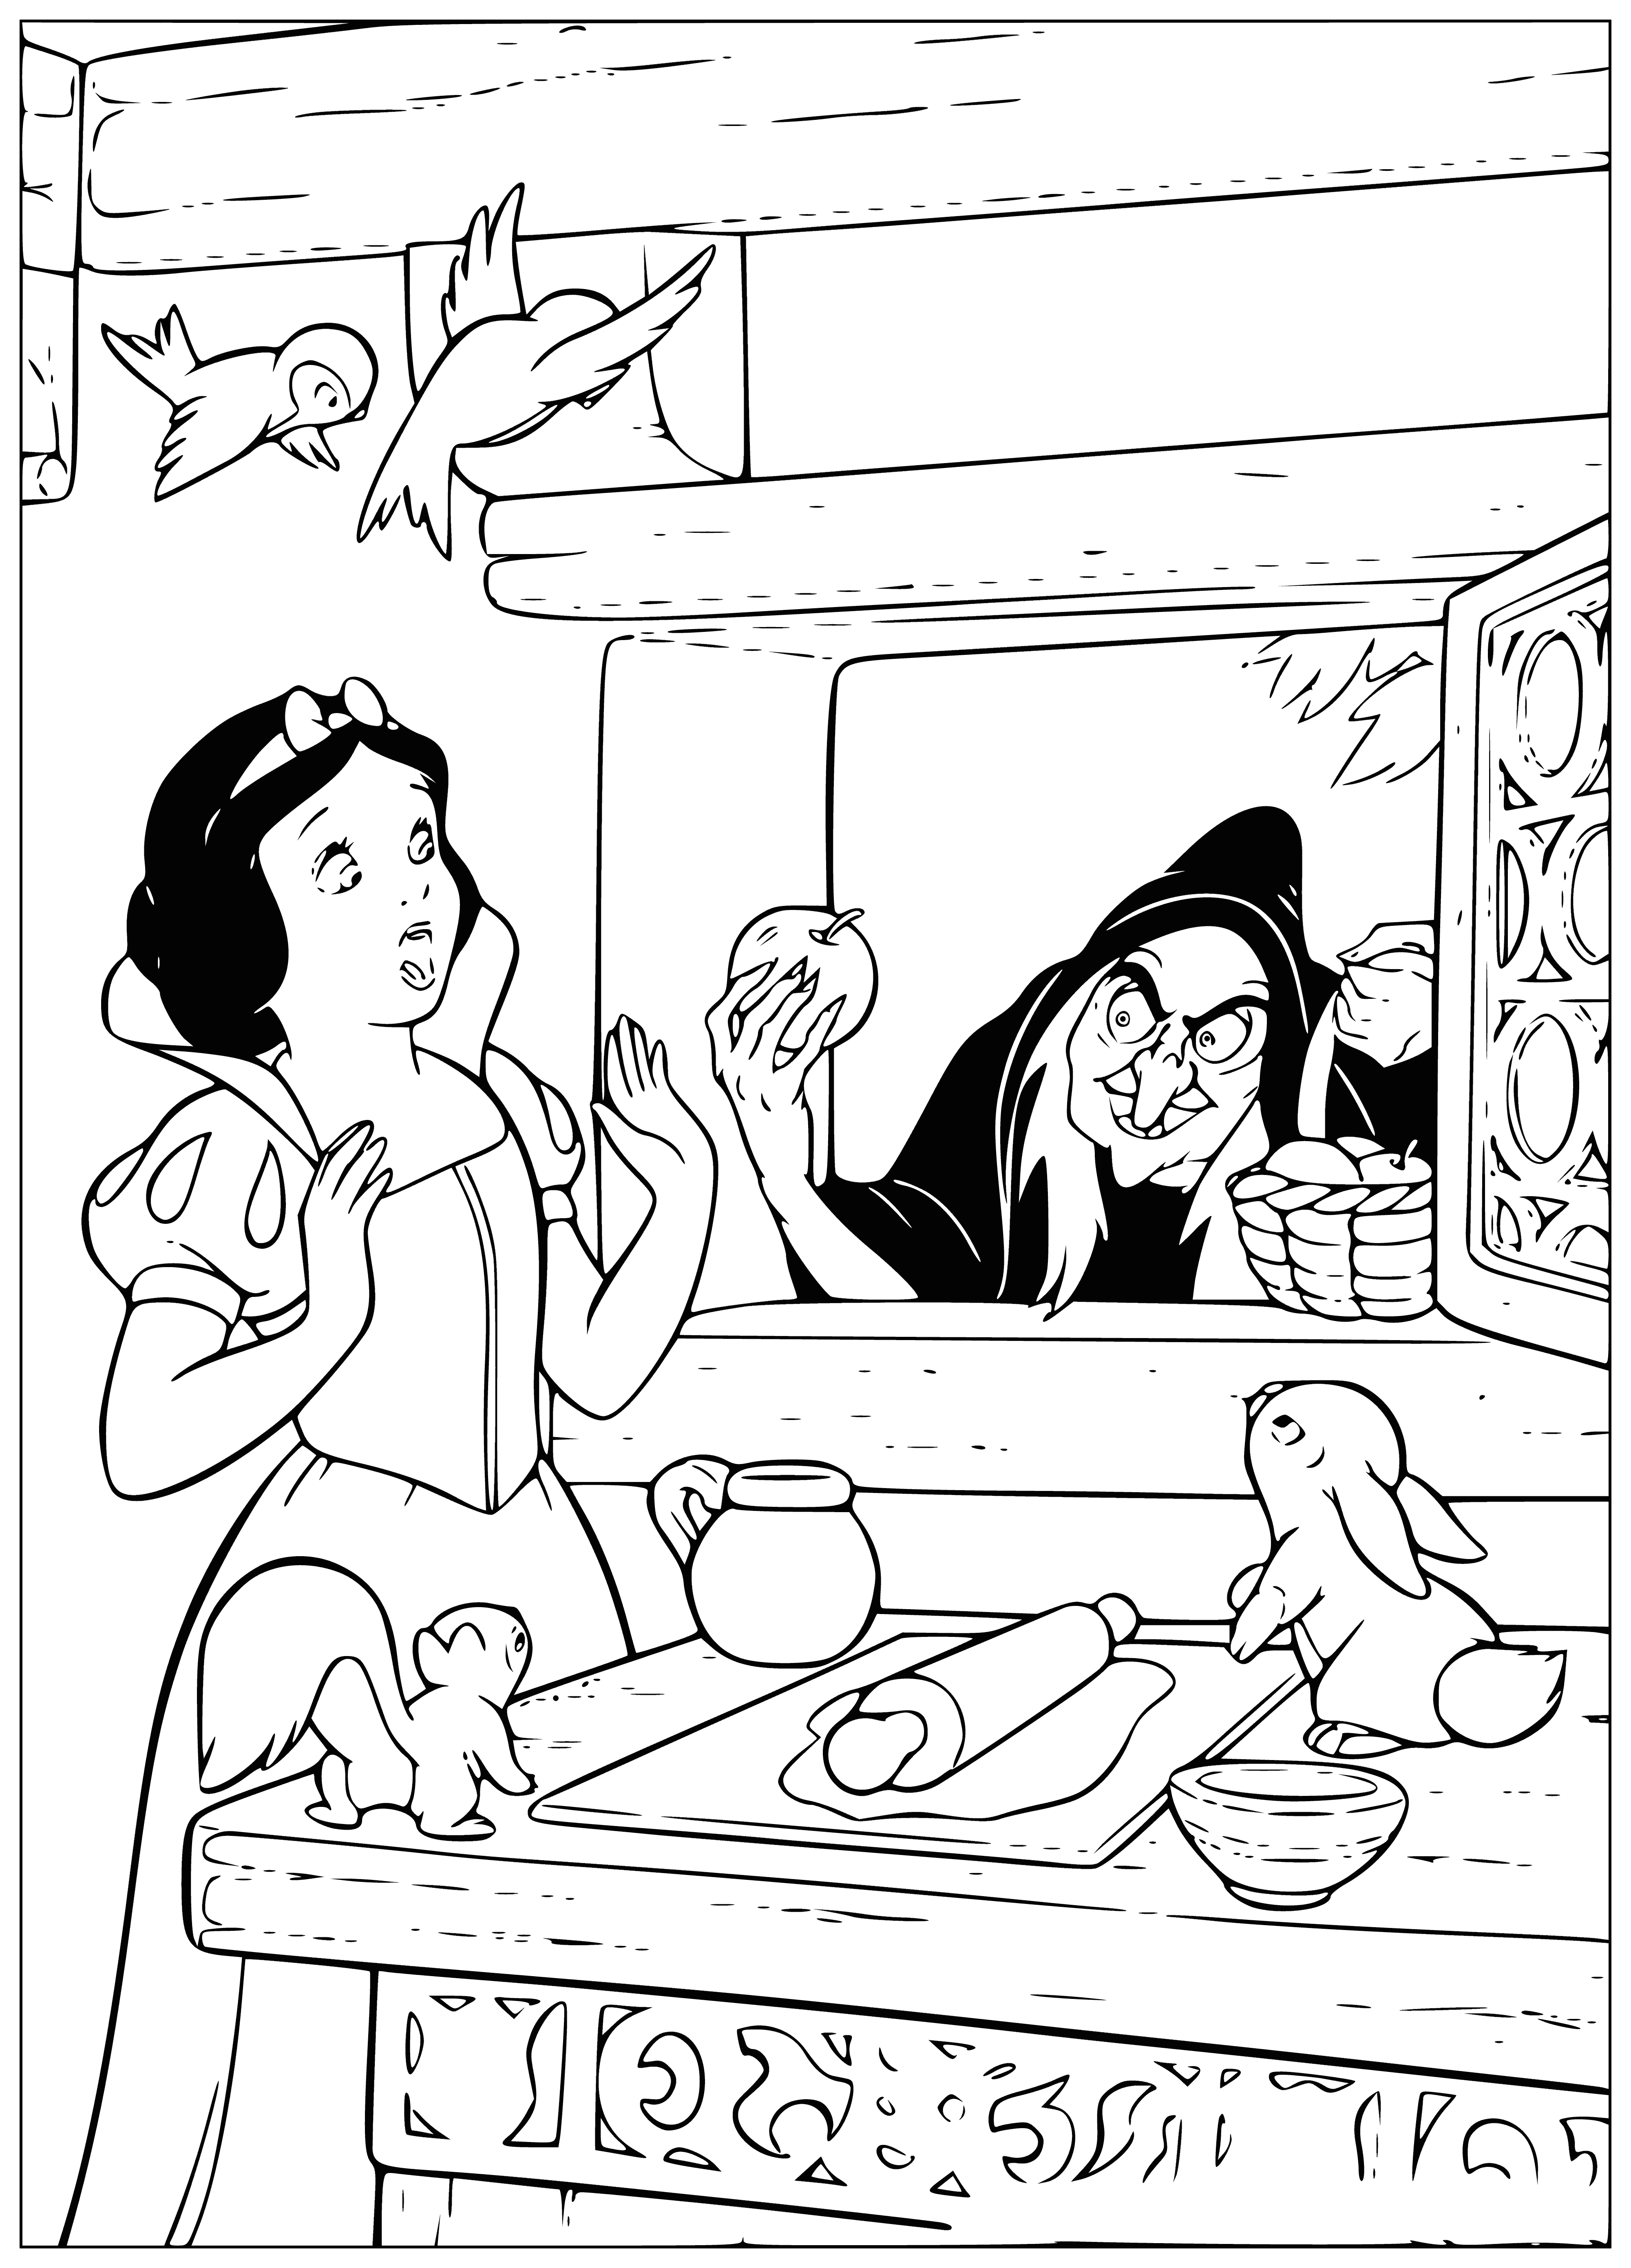 coloring page: Woman in dark cape offers apple to scared Snow White; face hidden in shadows of hood.